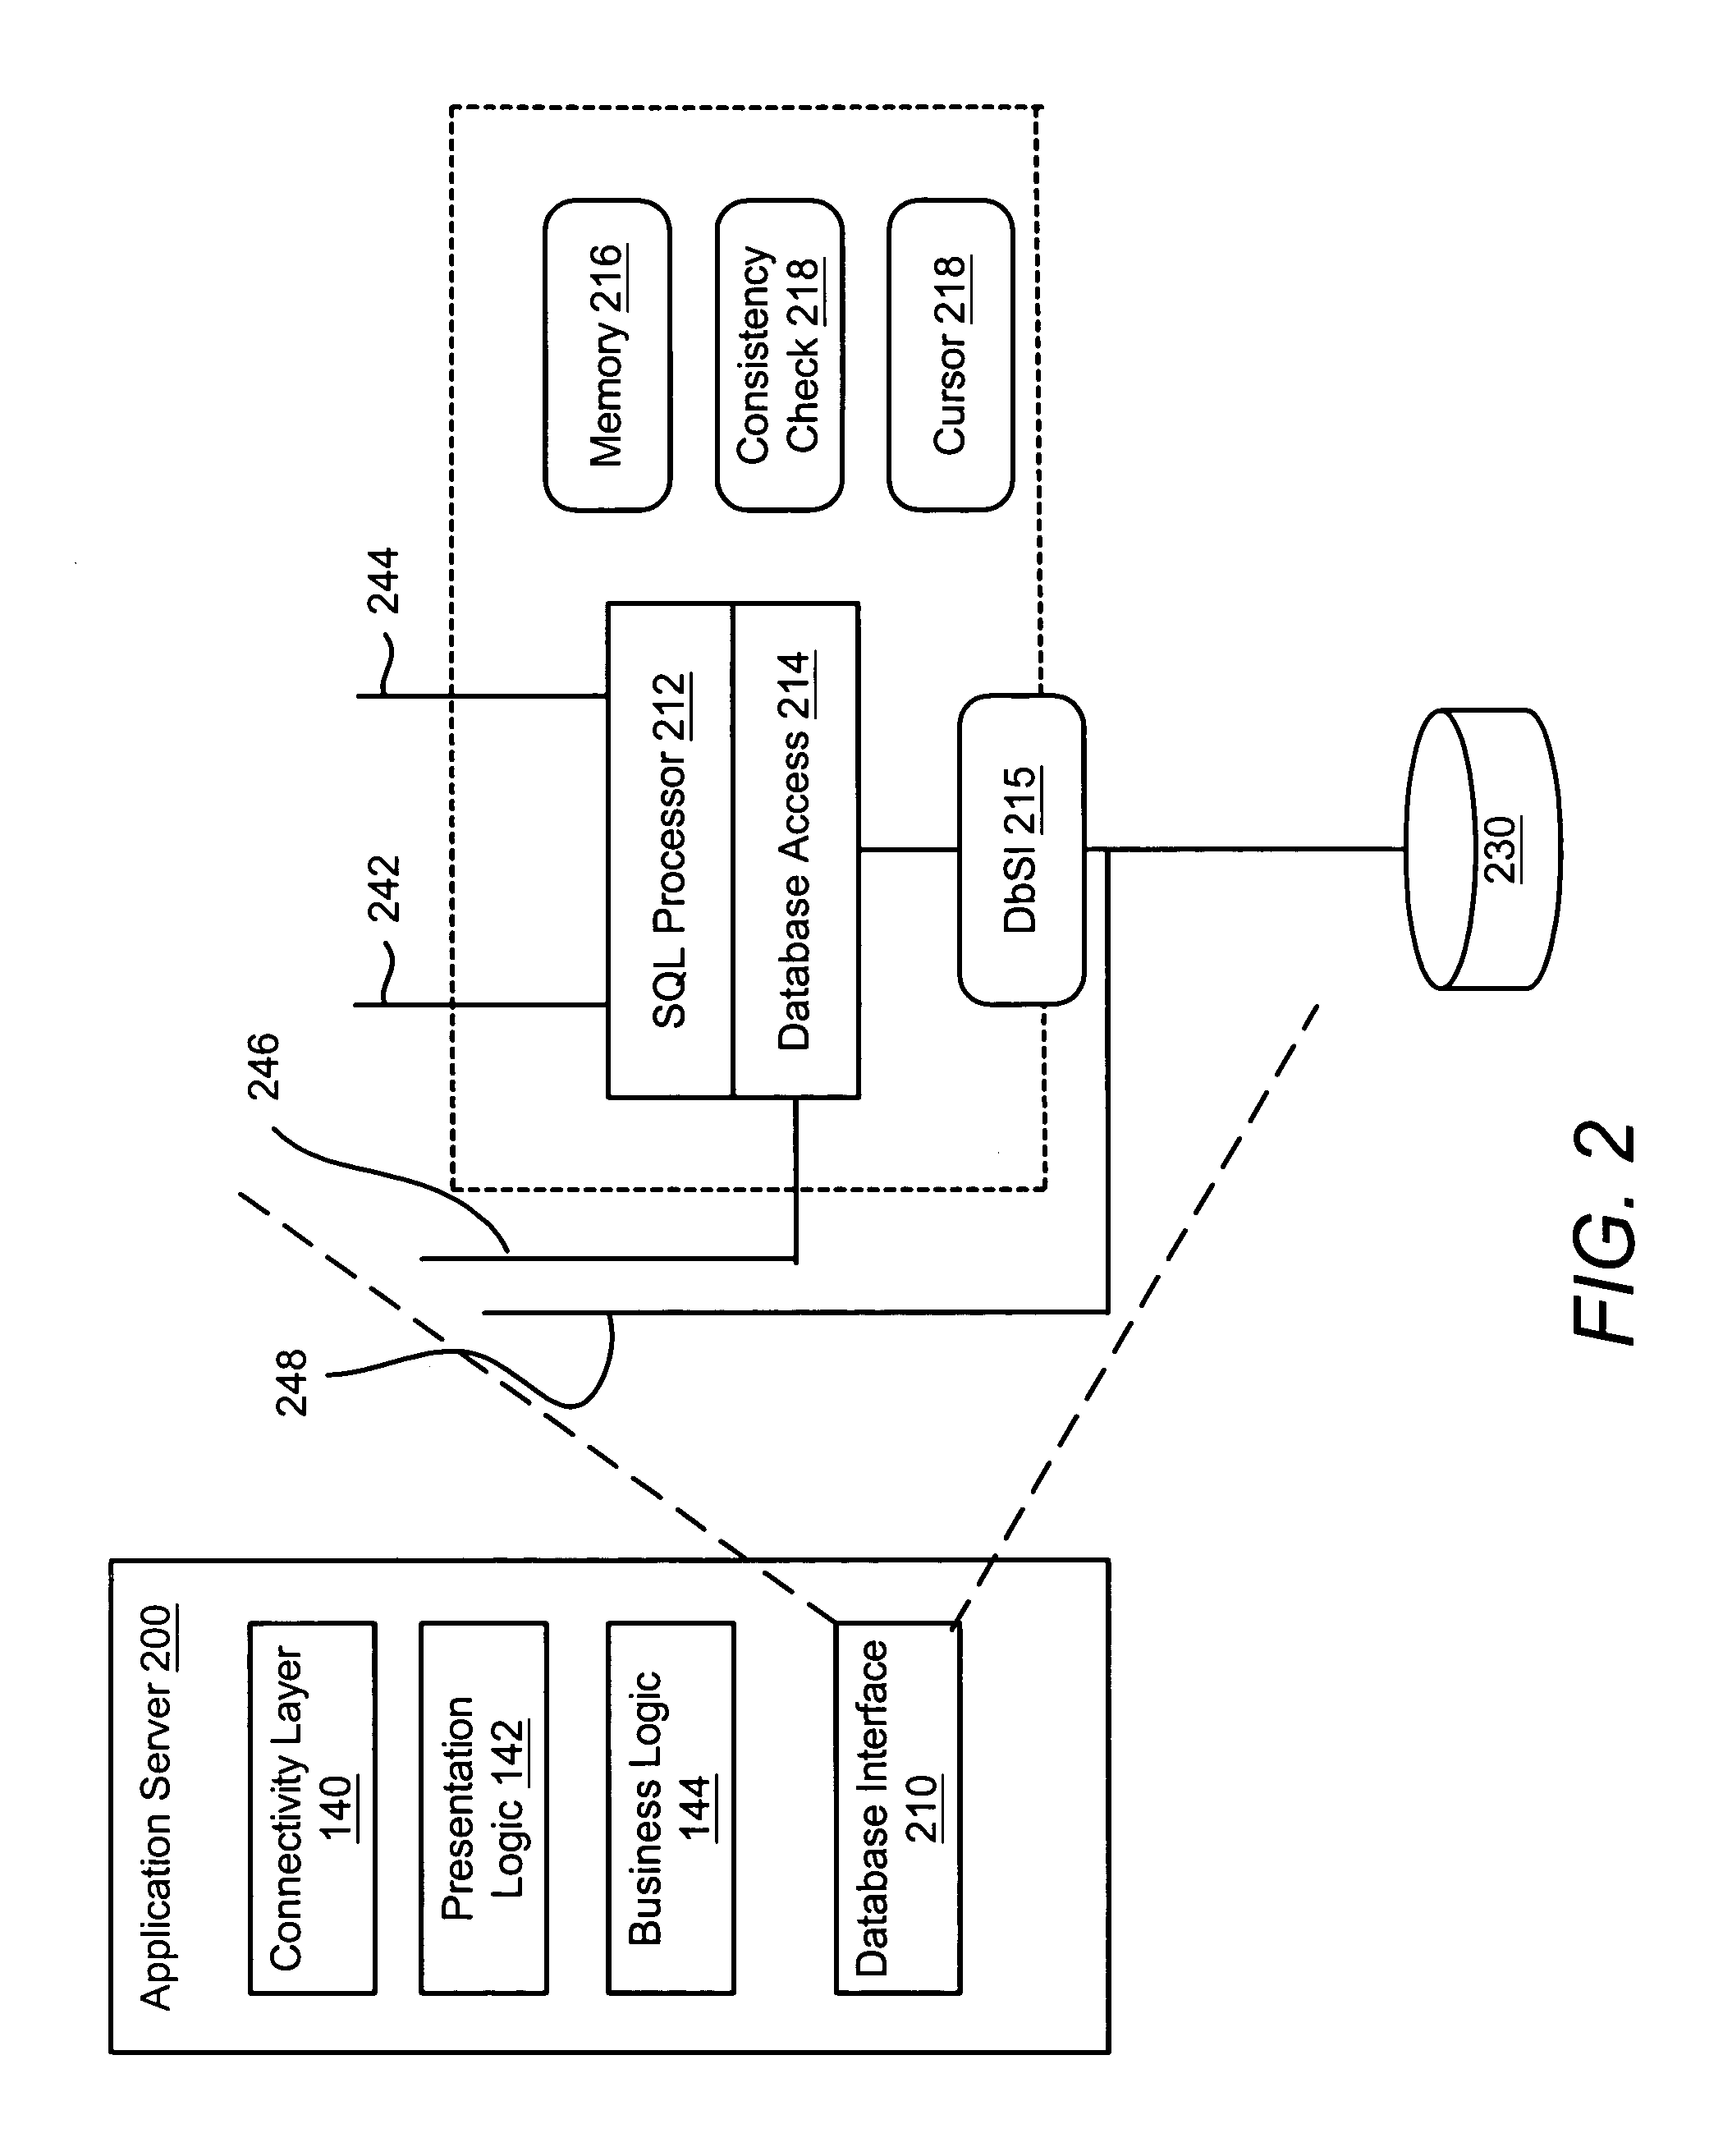 System and method for an optimistic database access